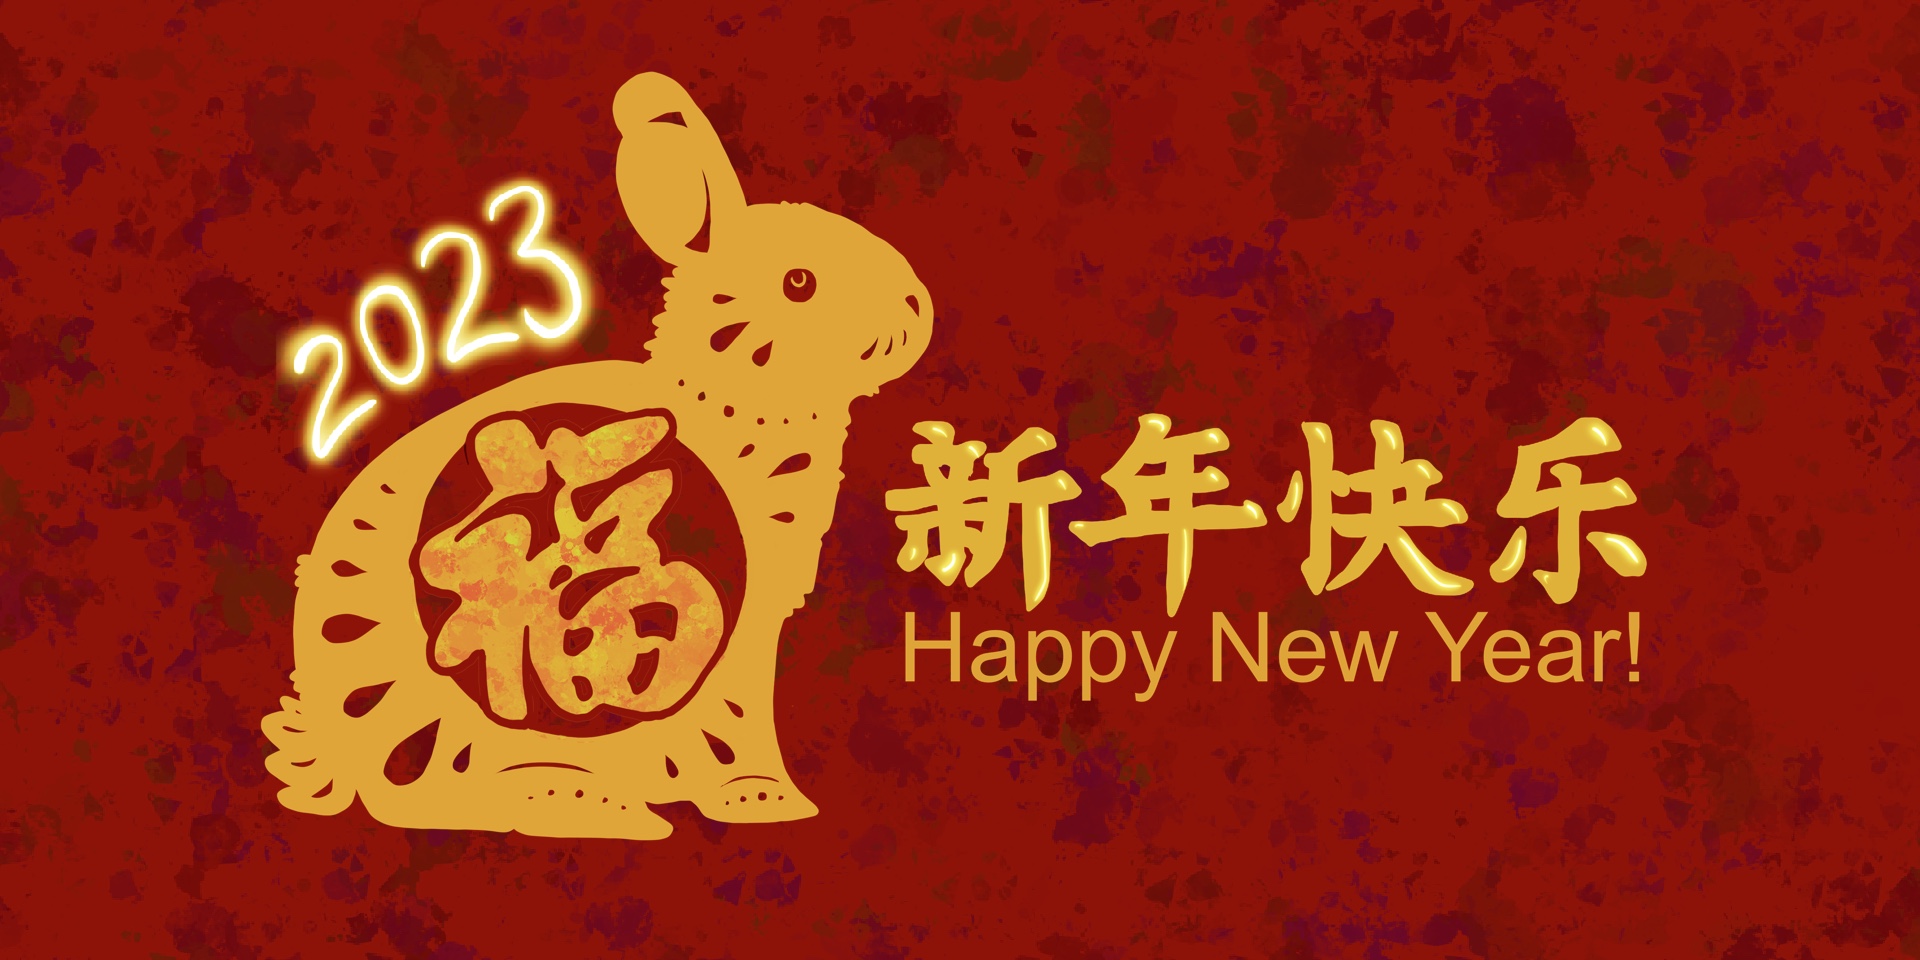 Red and gold rabbit design with text saying Happy New Year in English and Chinese